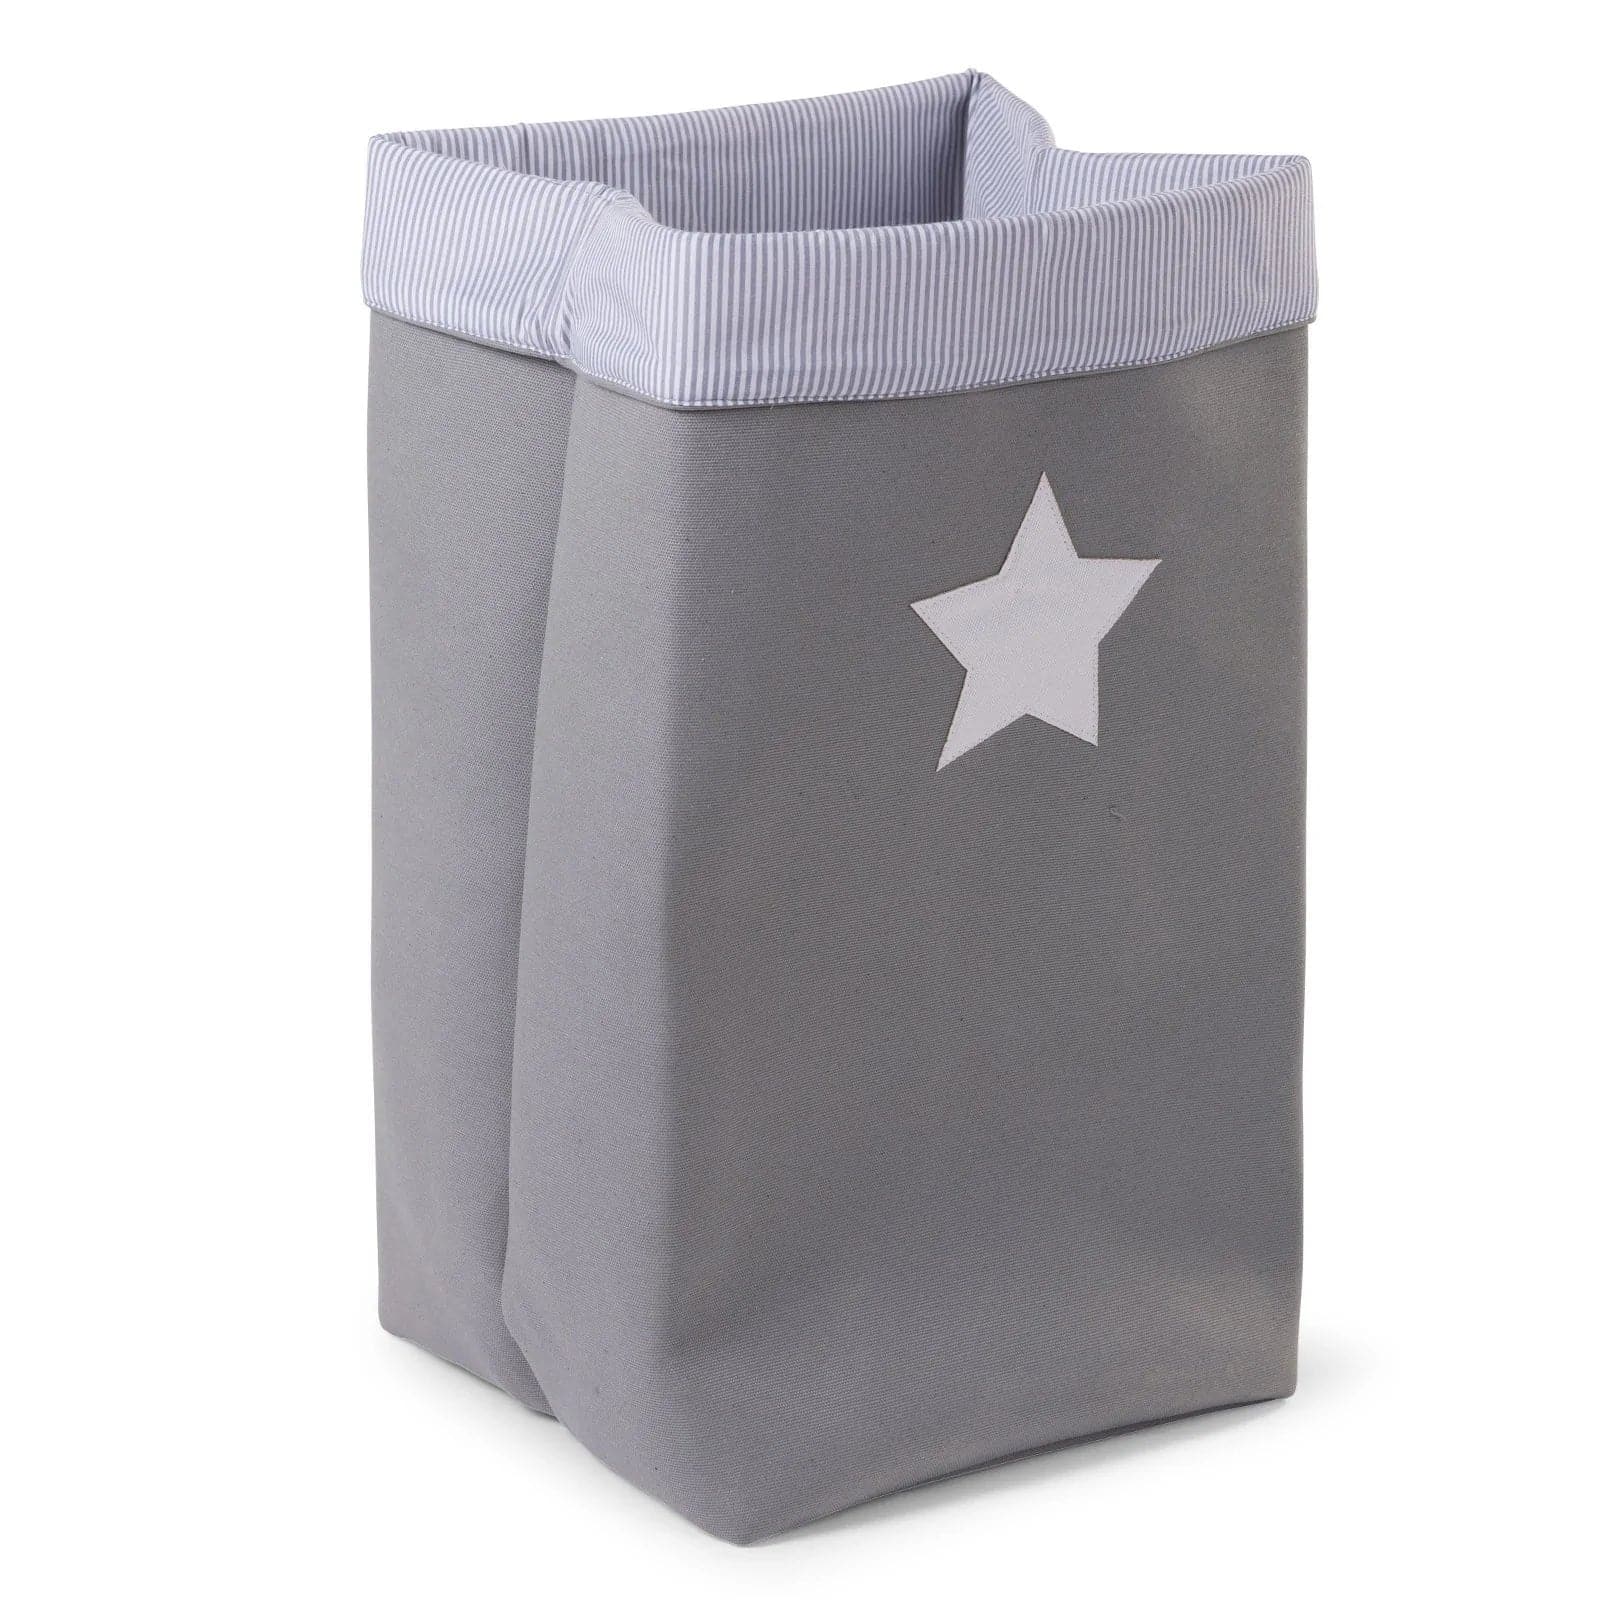 Childhome Canvas Storage Box 32 x 32 x 60 - Grey Stripes - For Your Little One